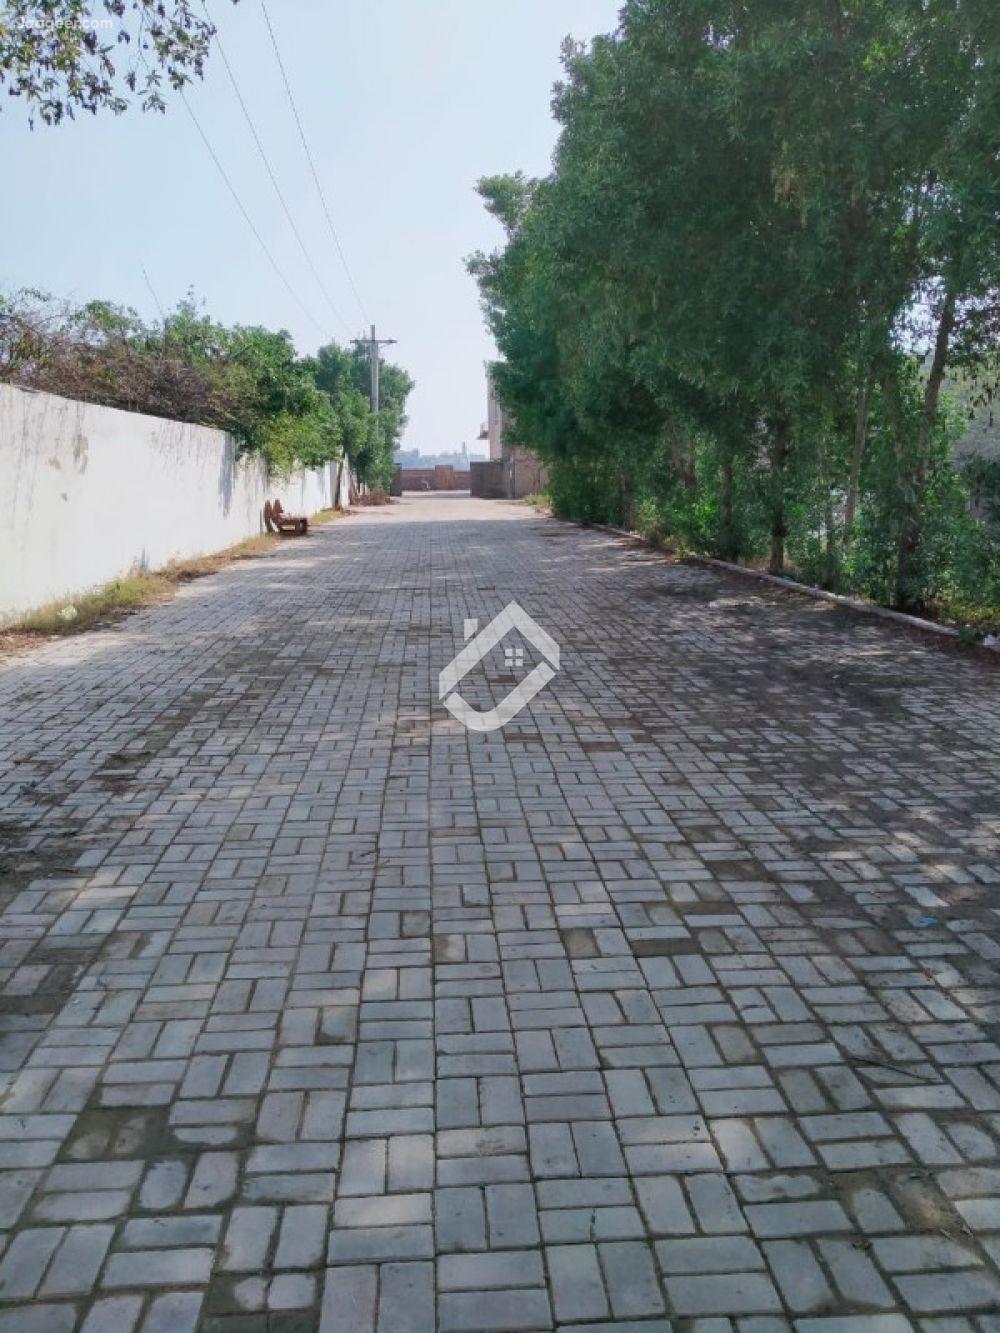 View  8 Marla Residential Plot Is Available For Sale at Main Faisalabad Road in Faisalabad Road, Sargodha